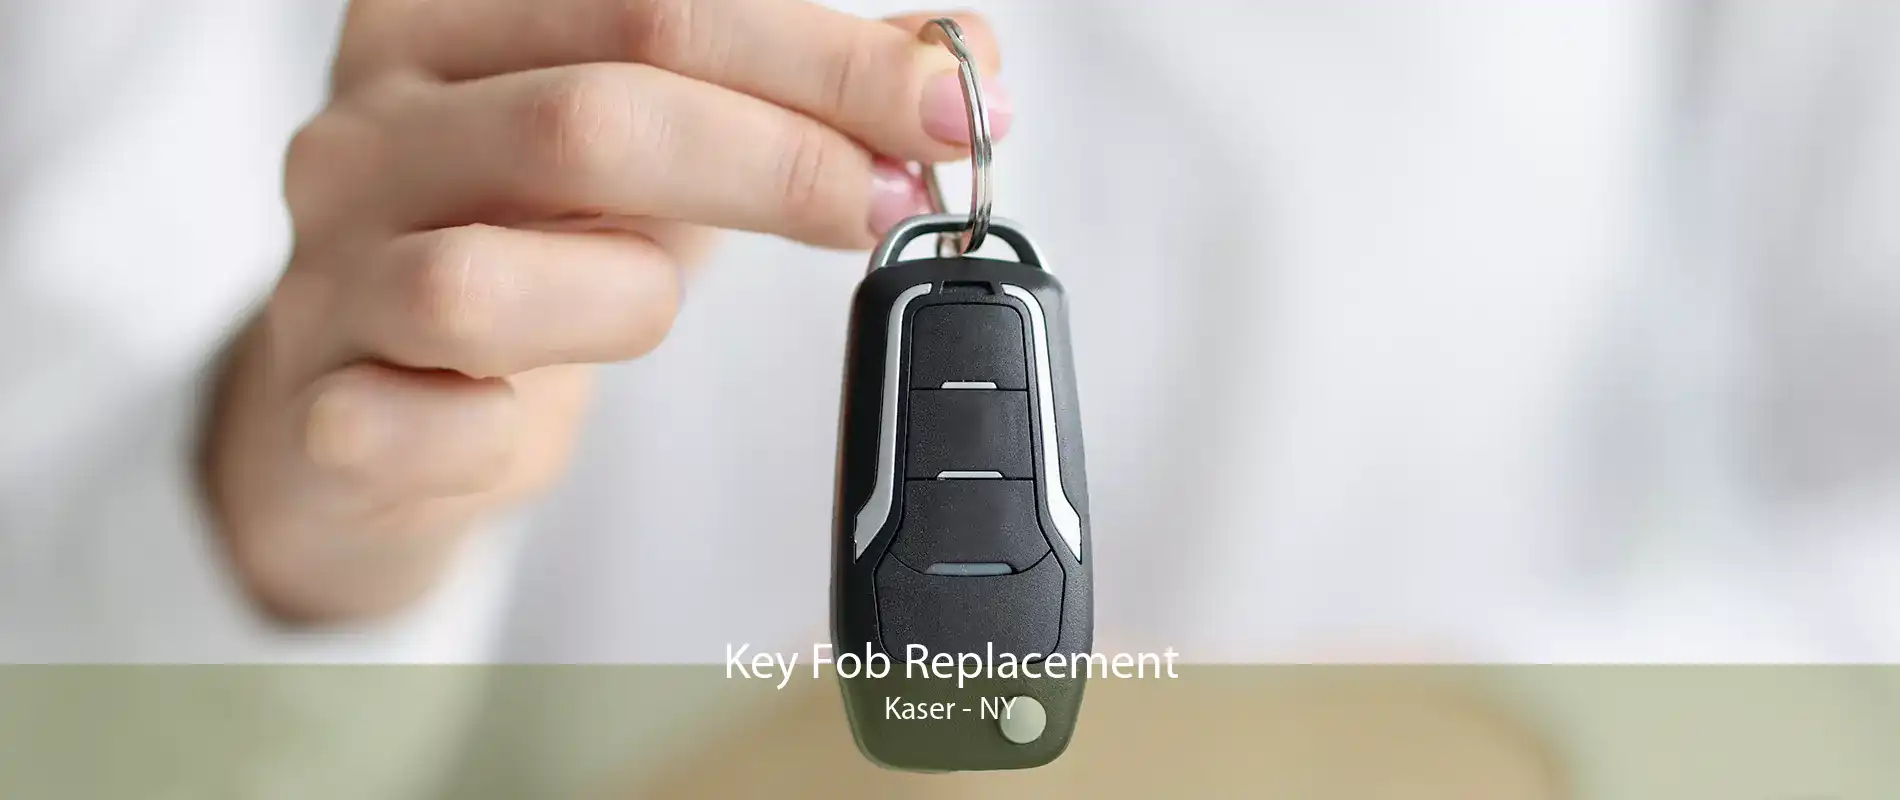 Key Fob Replacement Kaser - NY